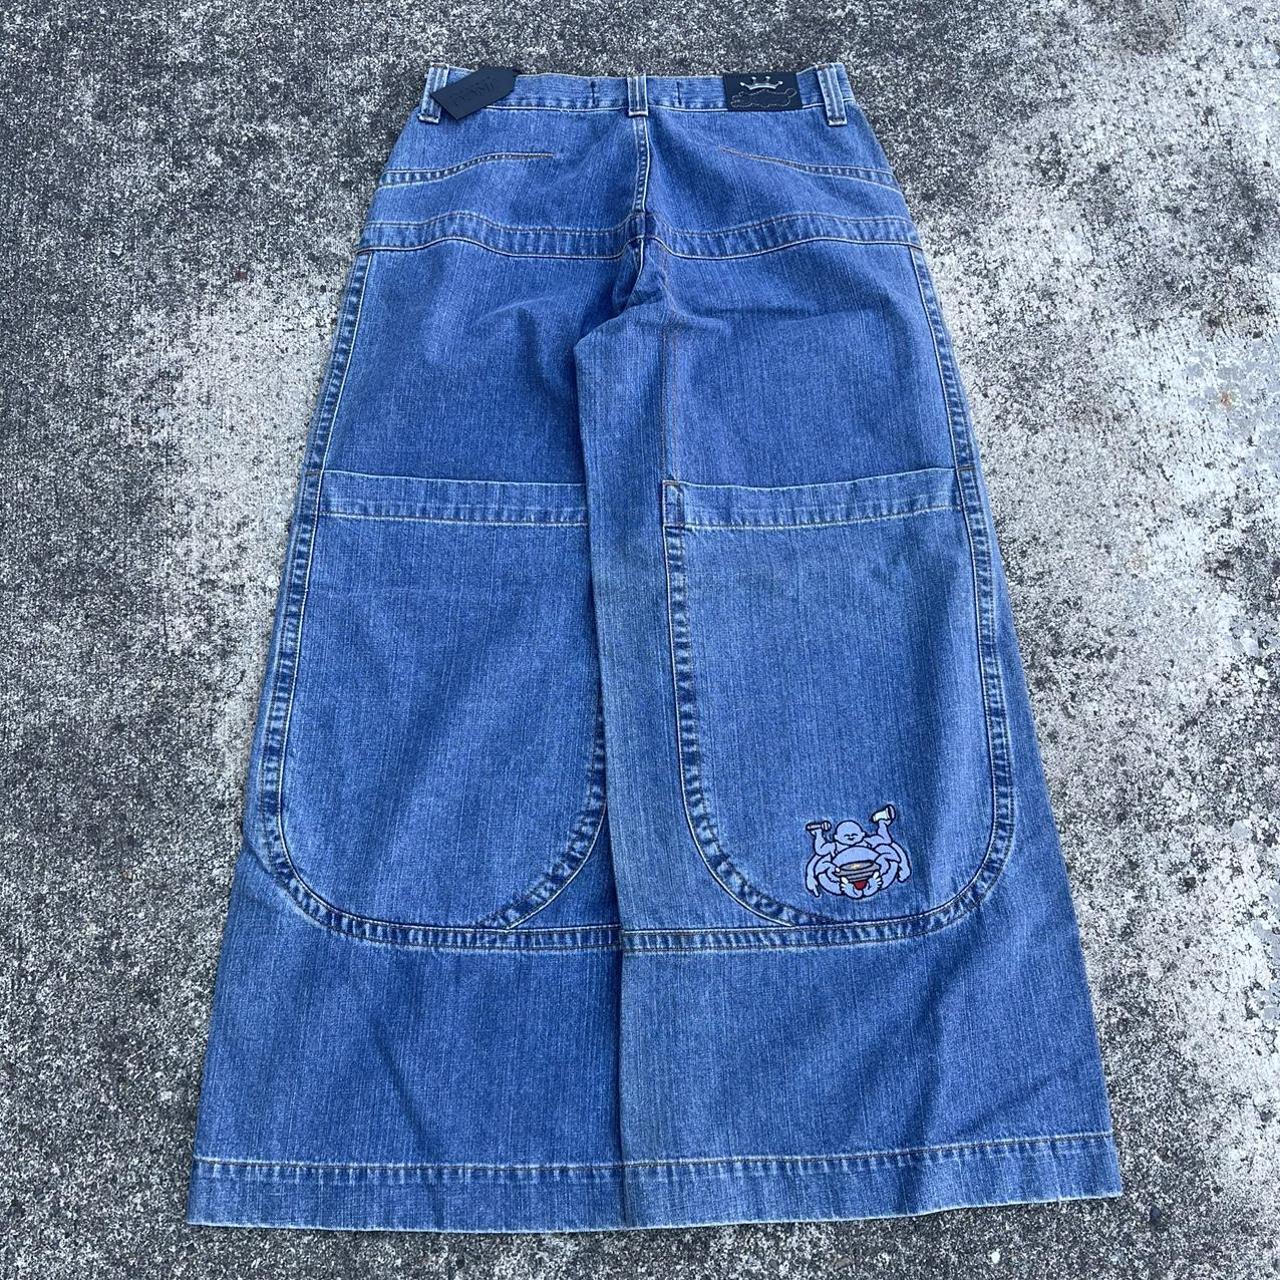 1/1 deadstock purple buddha jnco jeans only one of... - Depop